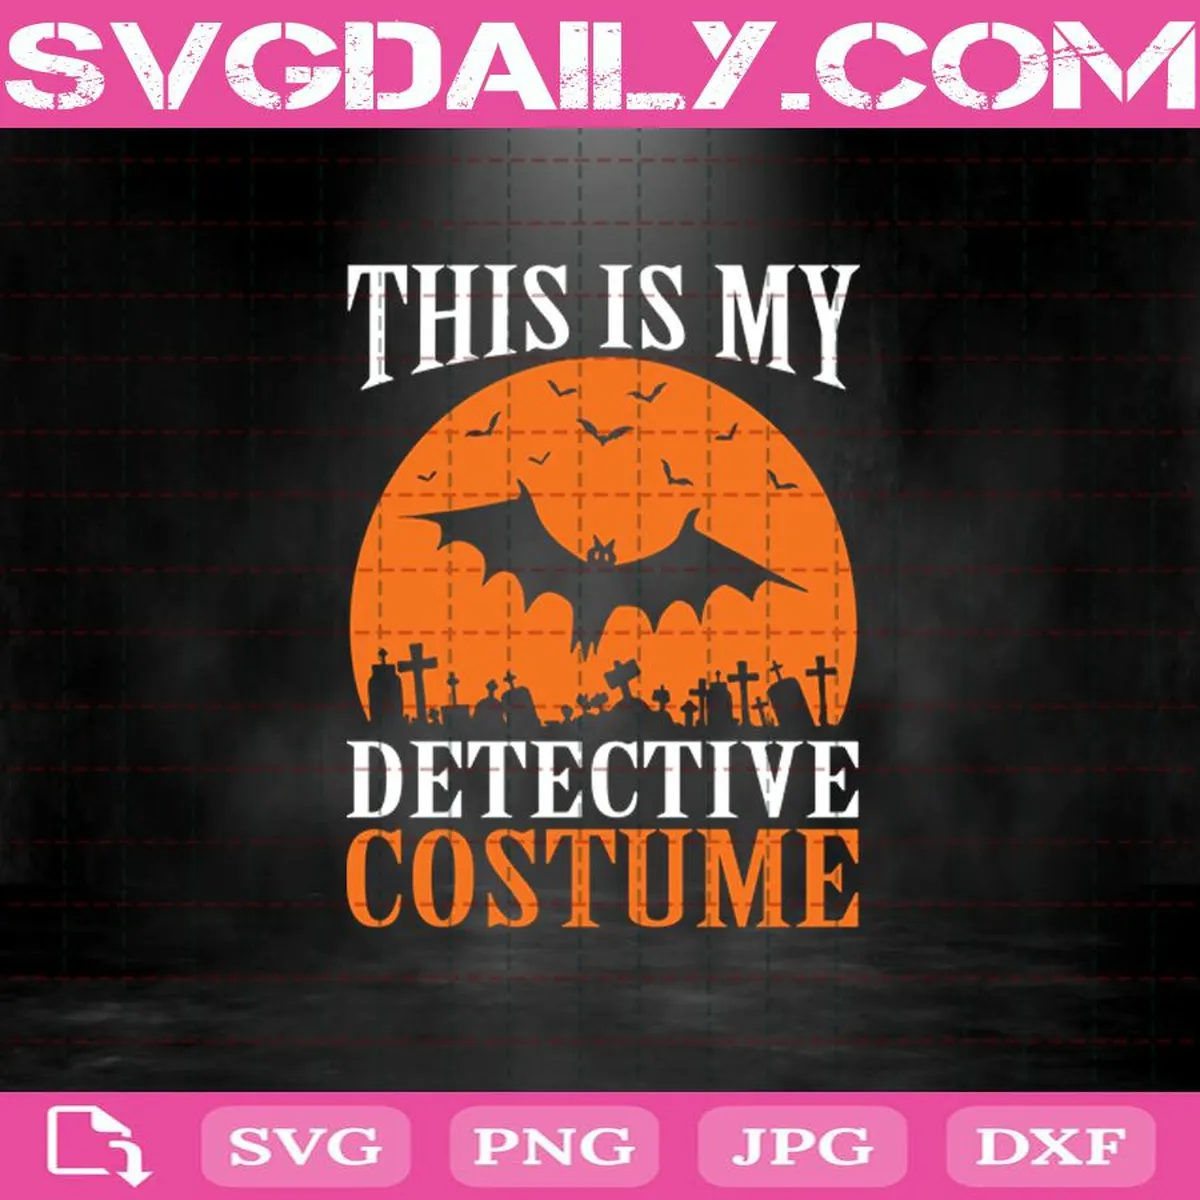 This Is My Detective Costume Svg, Halloween Svg, Bat Svg, Svg Files, Cutting Files, Silhouette, Digital Download